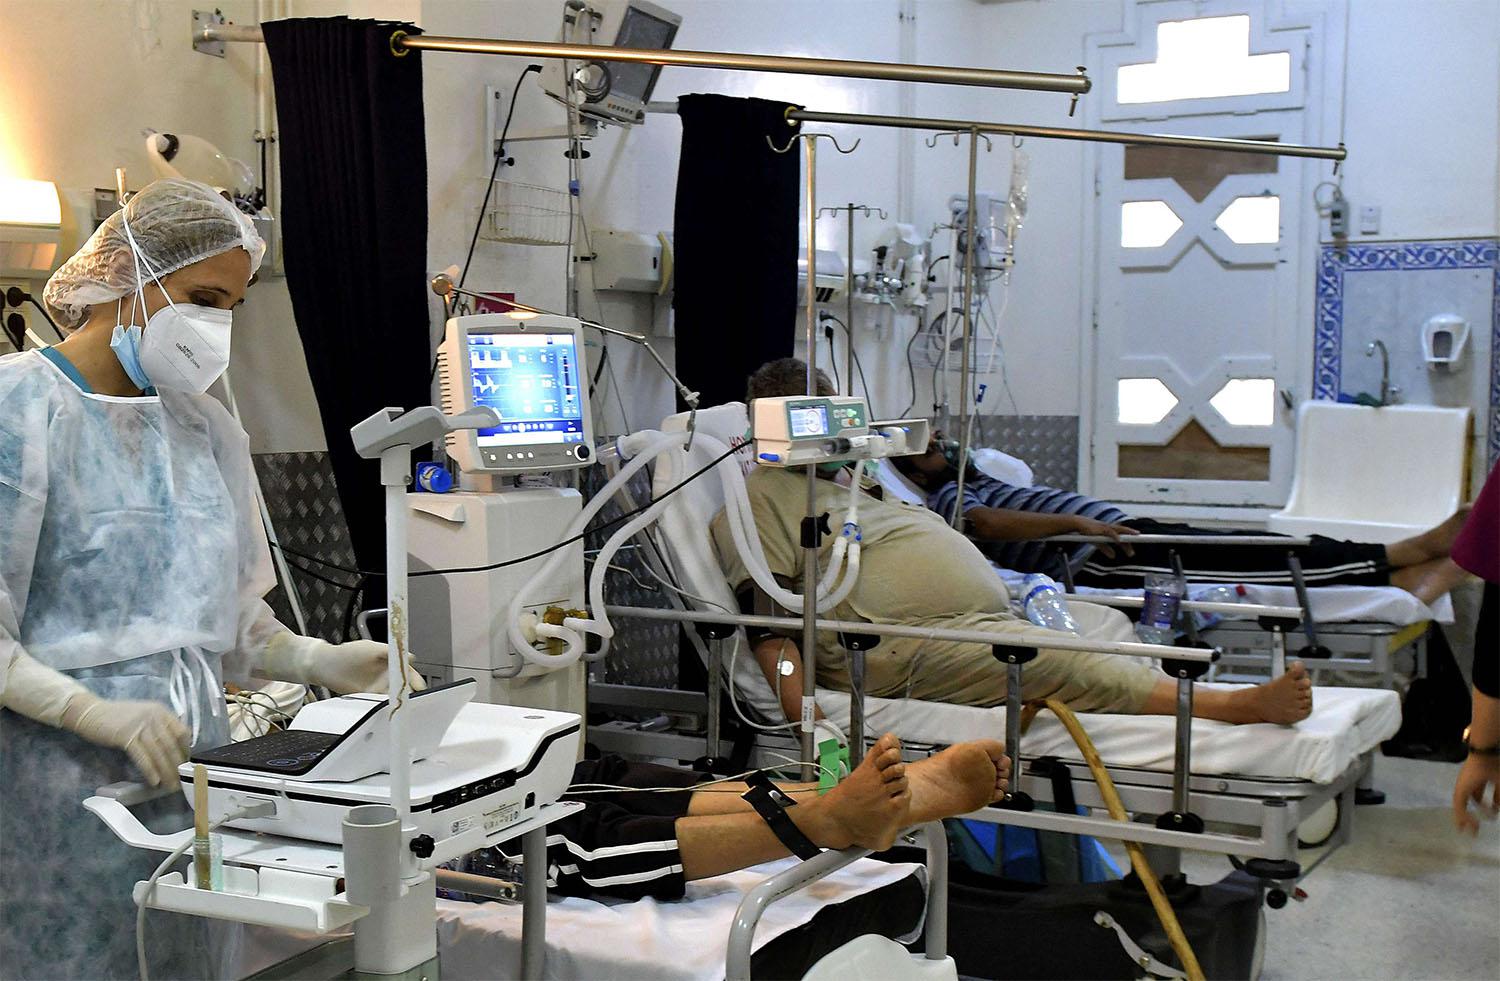 The health ministry denies claims that the health system in Tunisia is collapsing